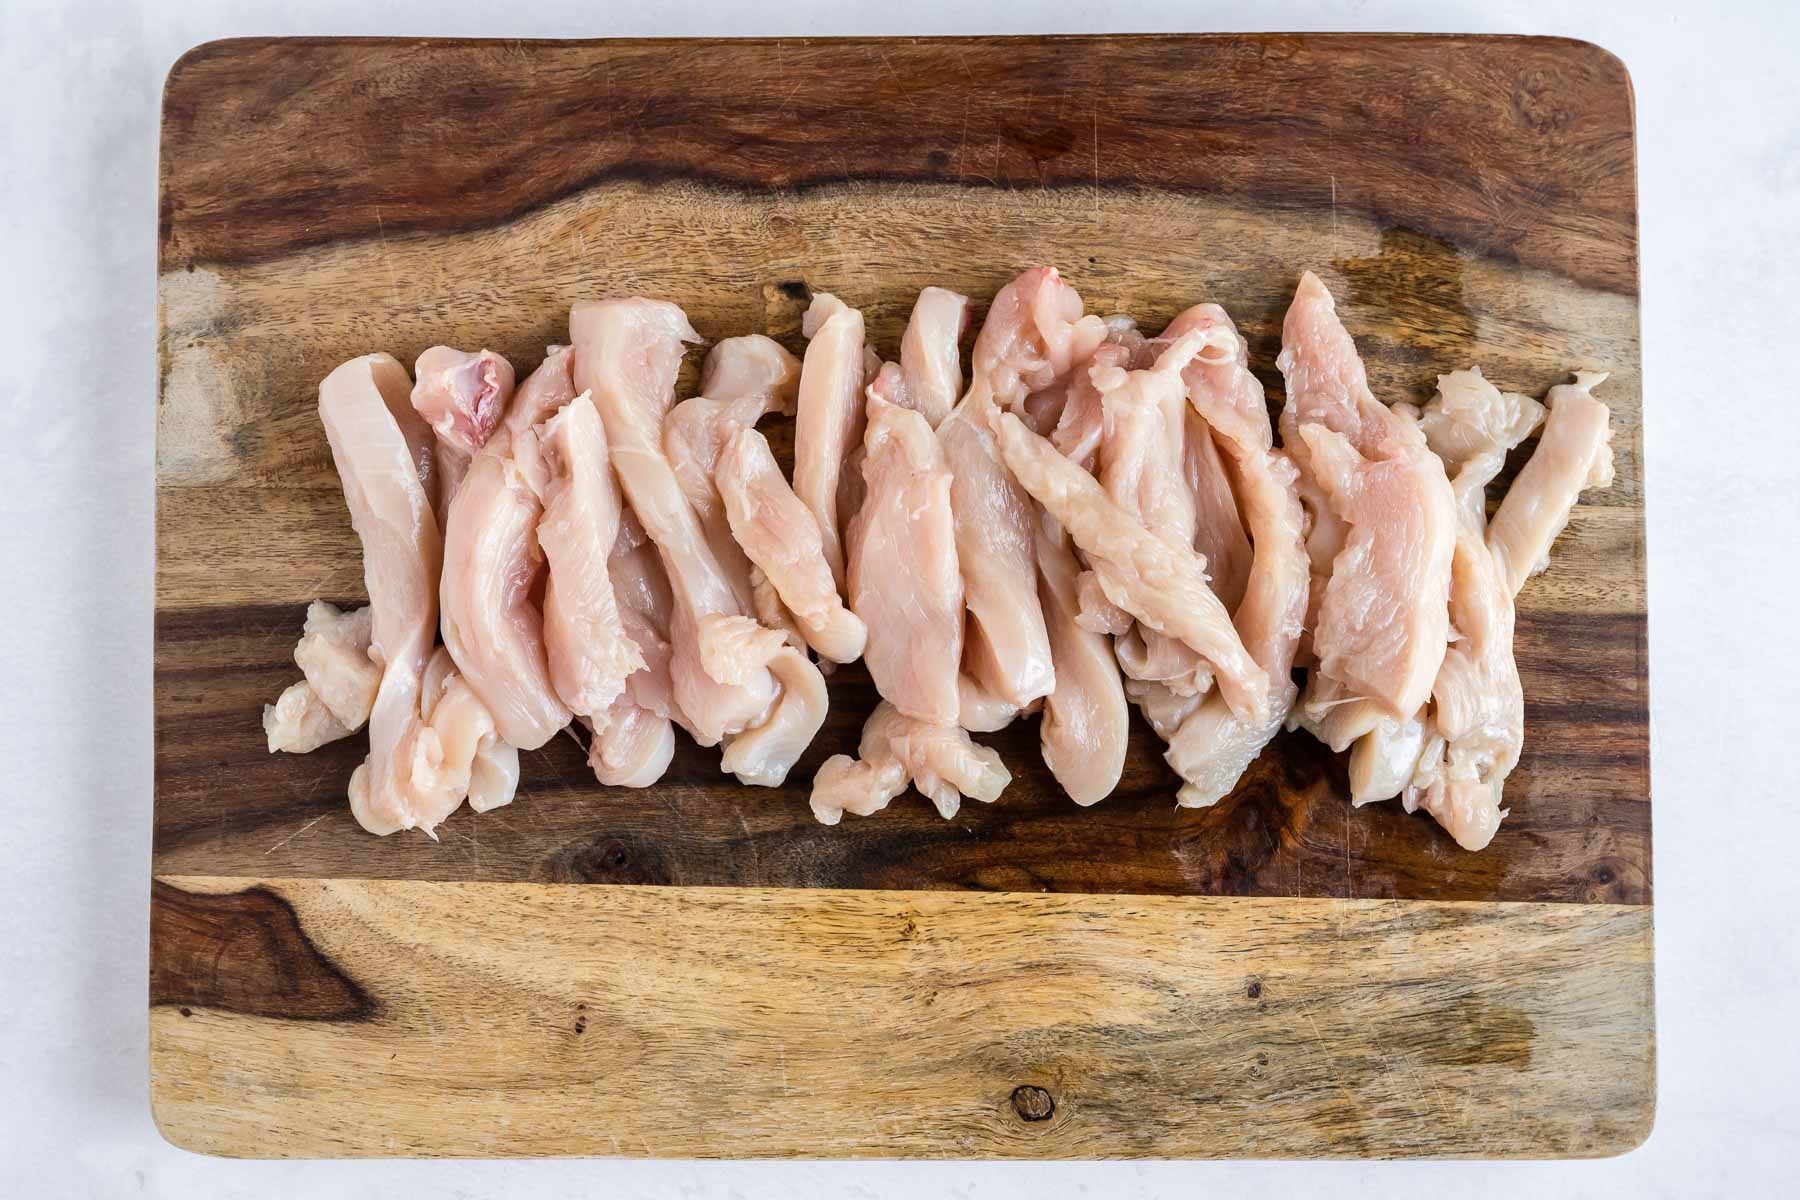 Strips of chicken on a cutting board.